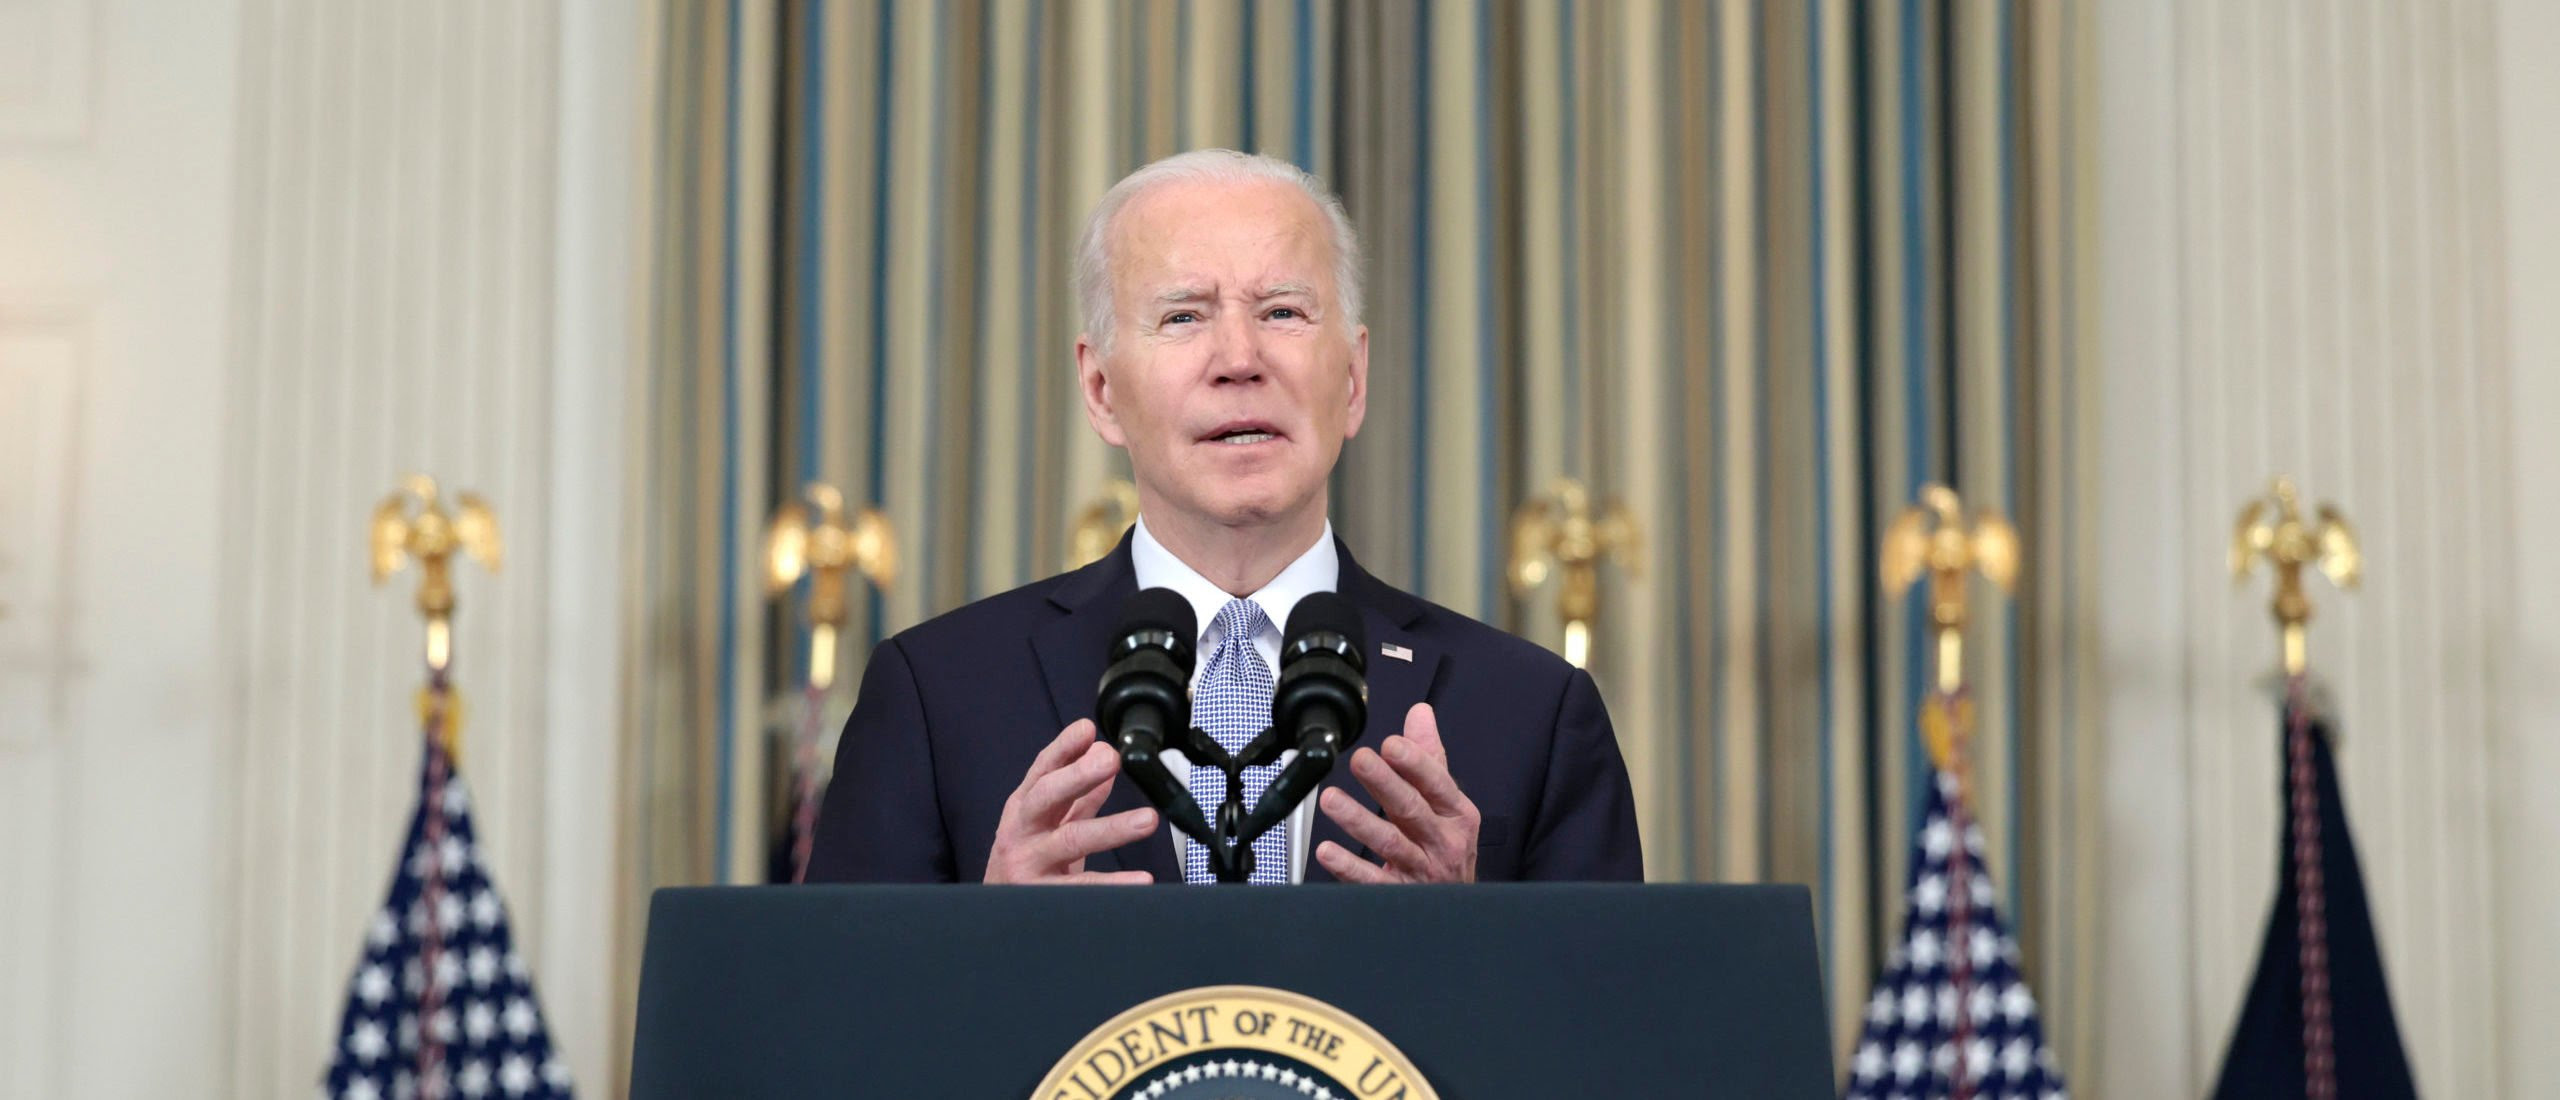 Book Claims Biden Once Called Fox Co-Chair Murdoch The ‘Most Dangerous Man In The World’